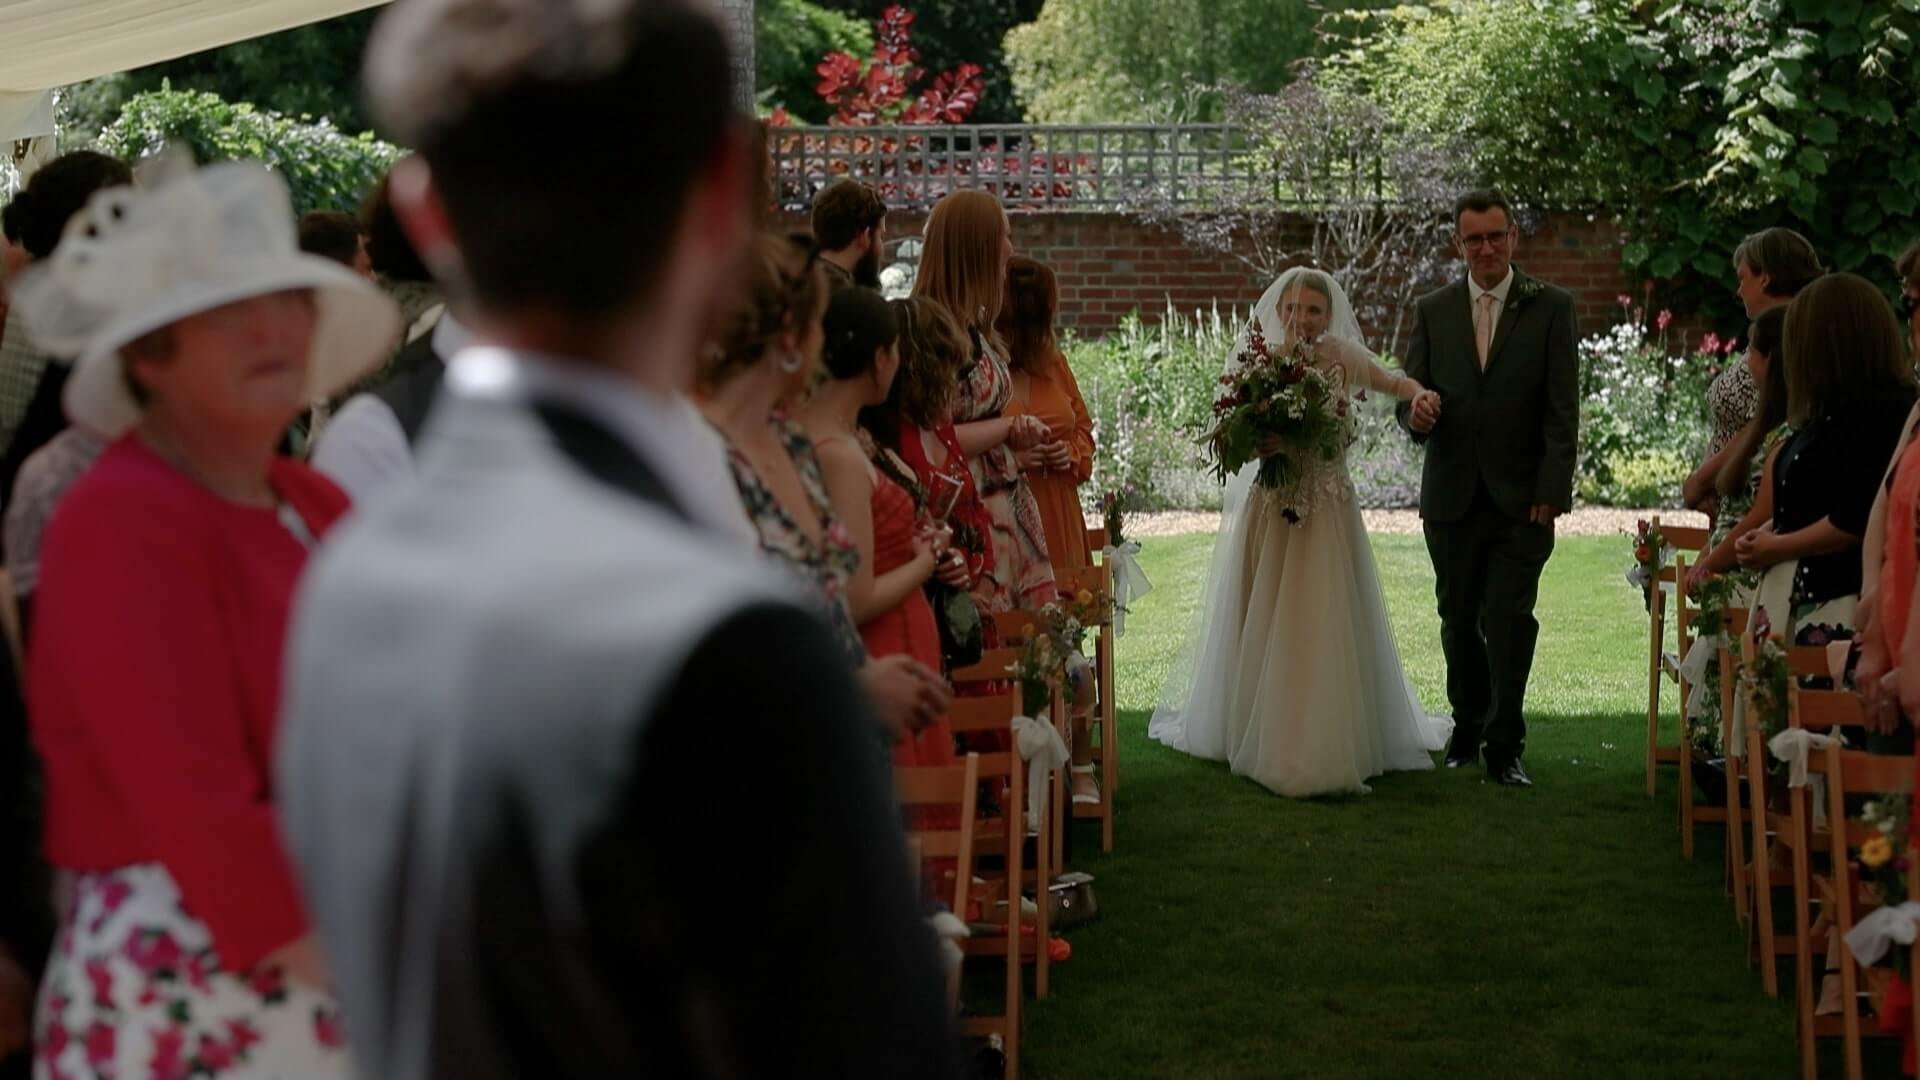 Callum tearfully watches his wife-to-be walk down the aisle with her father